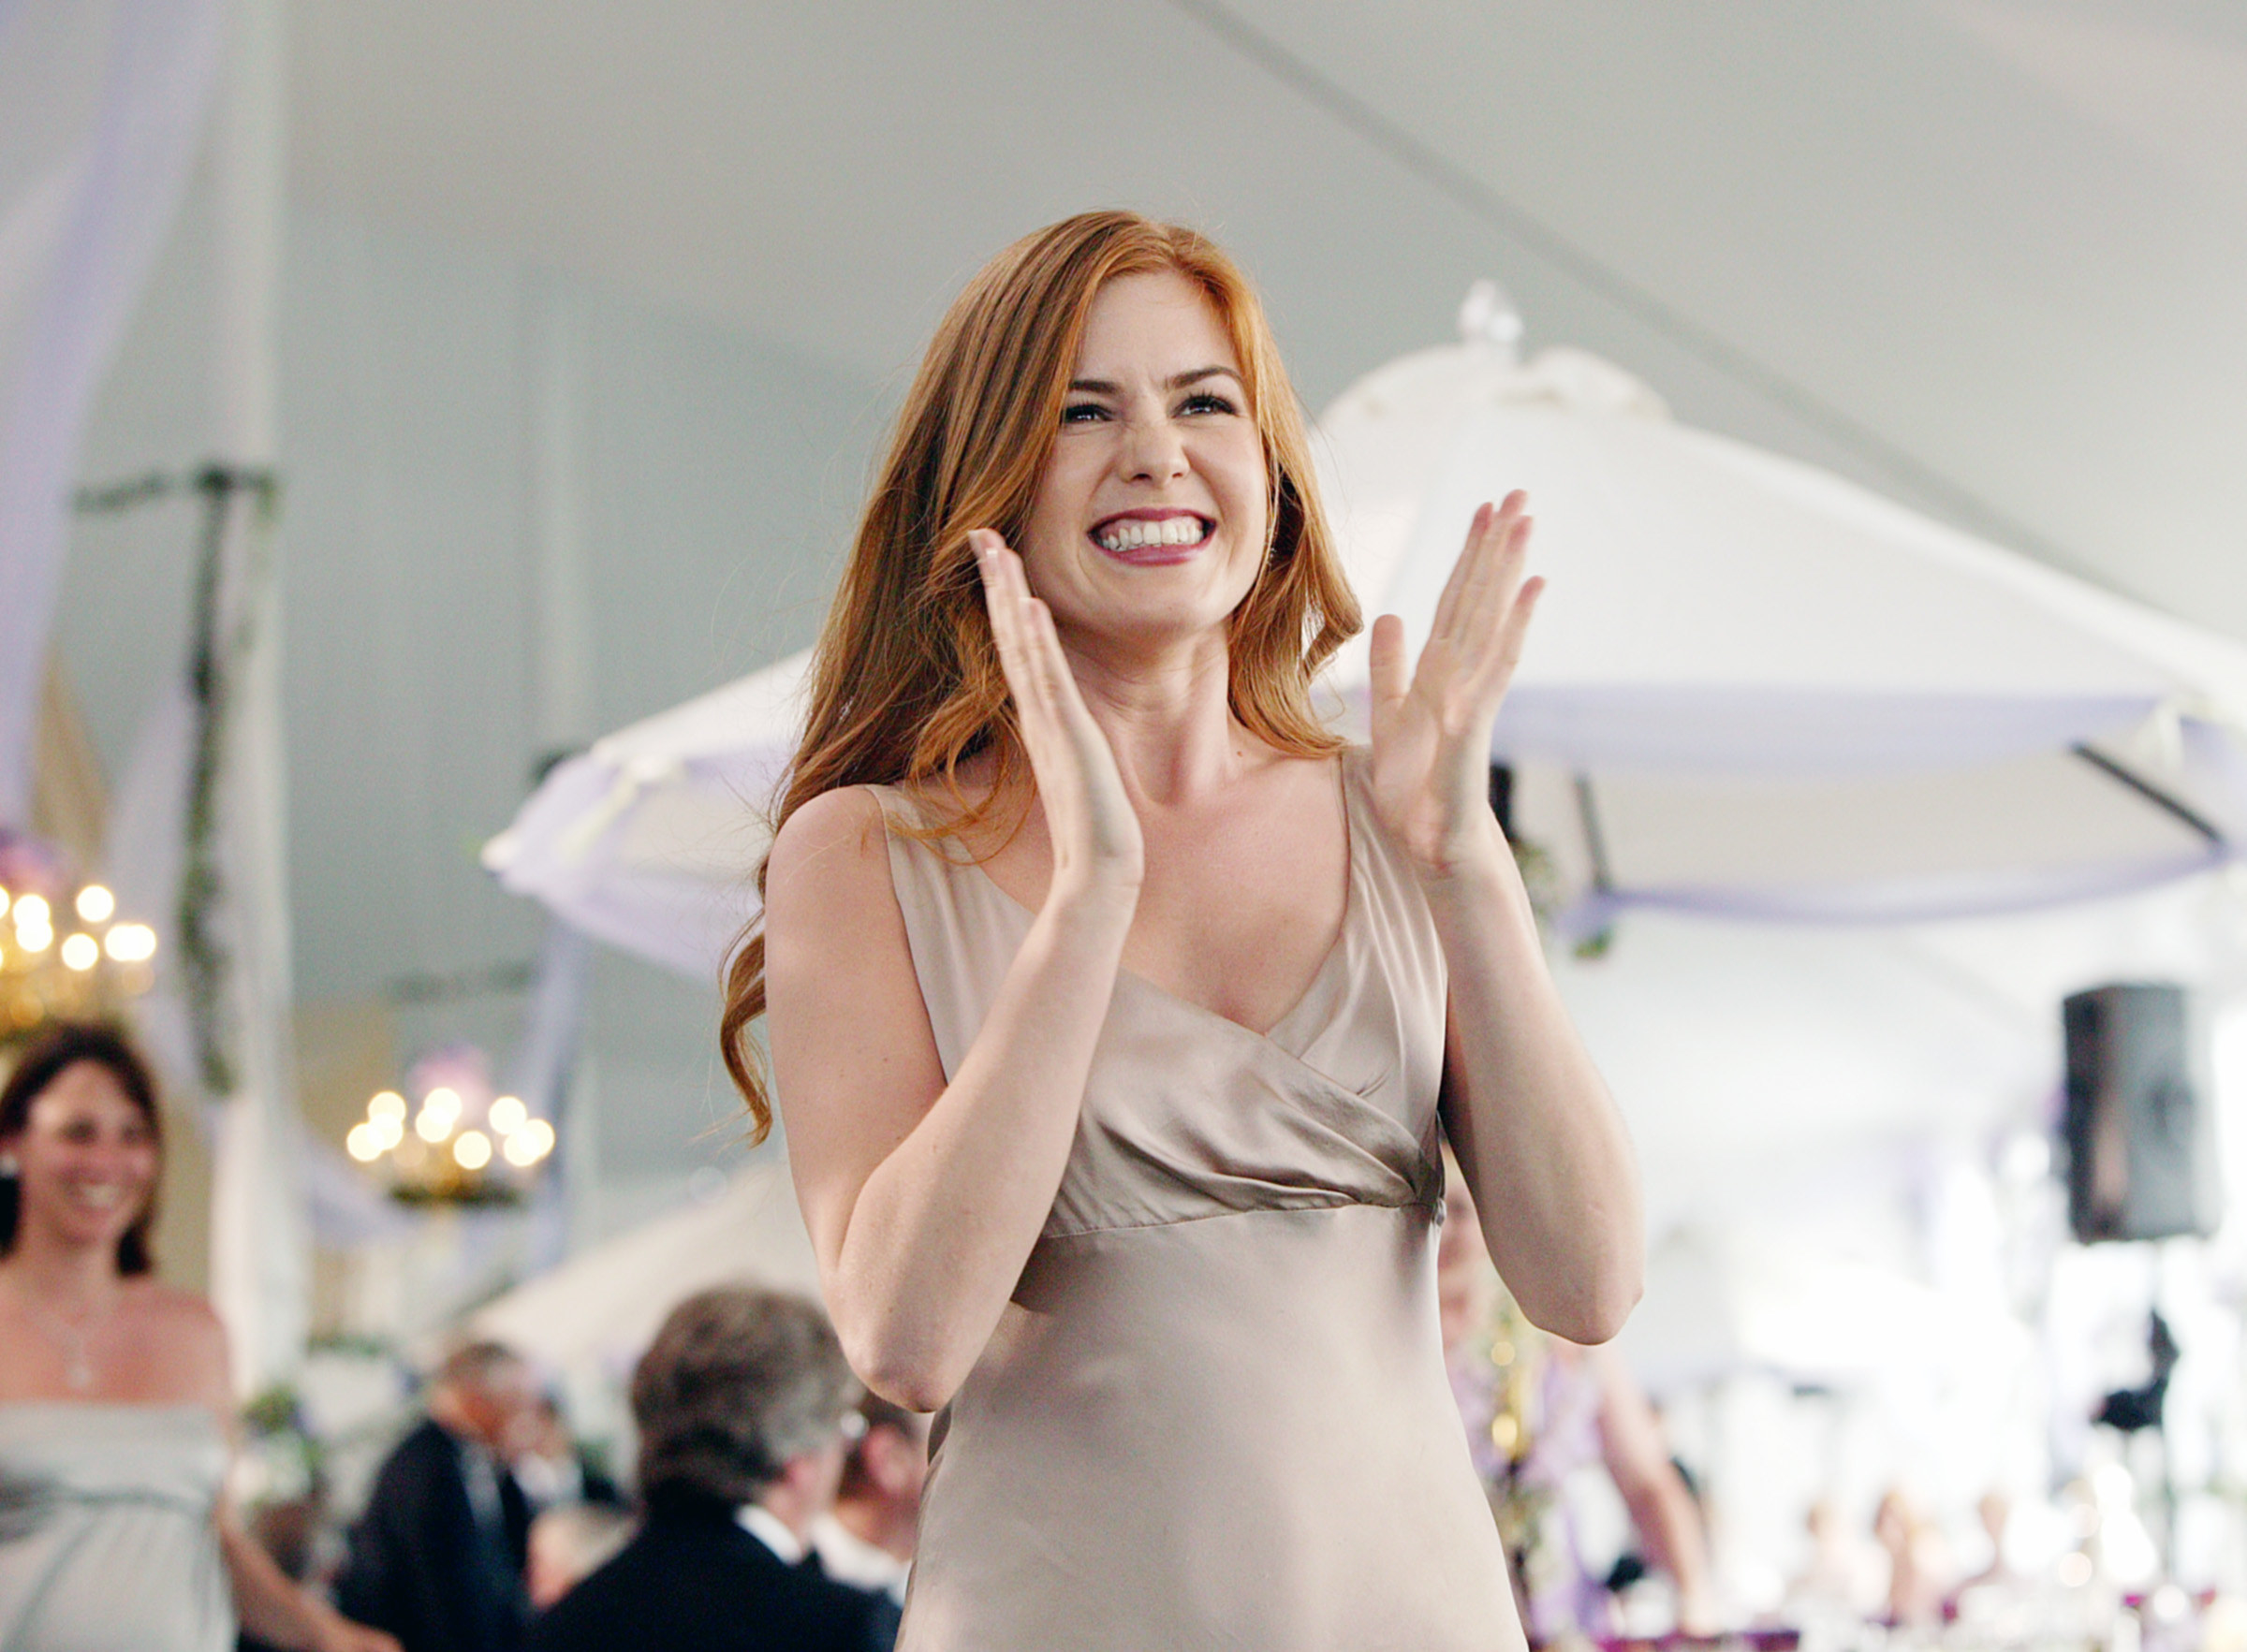 Gloria clapping at a wedding